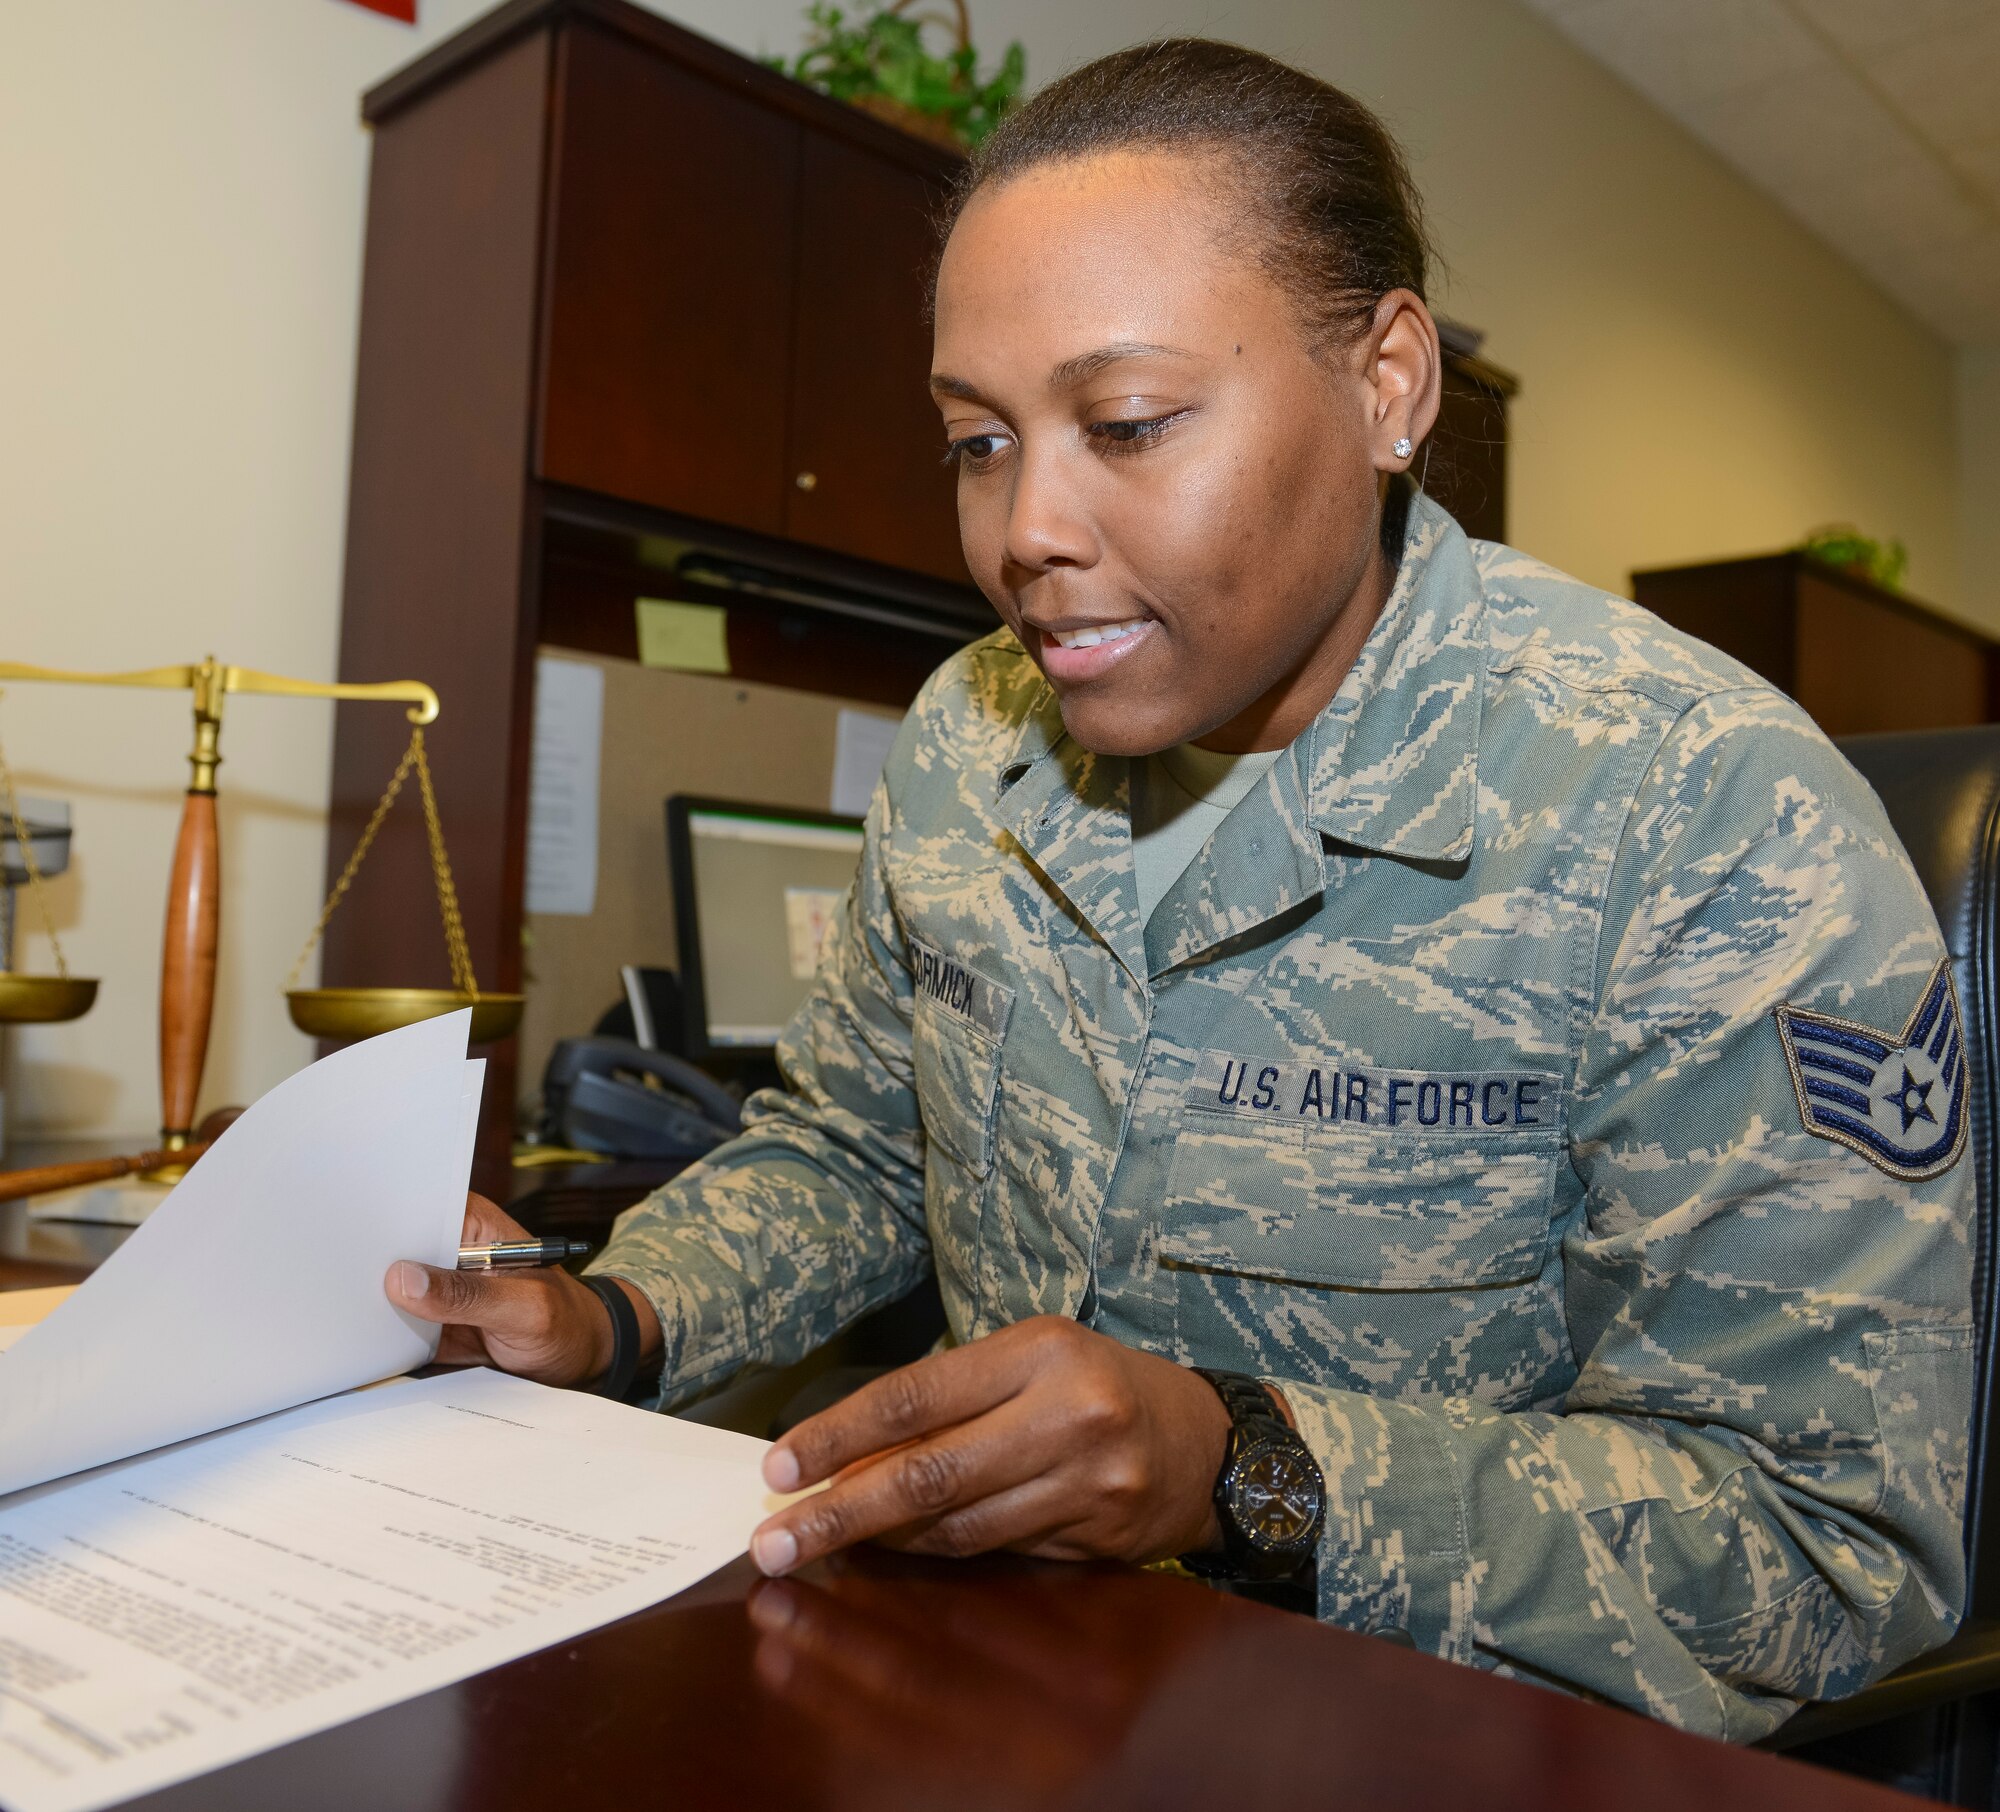 Air Force Staff Sgt. Barricia McCormick, a paralegal with the 116th Air Control Wing, Georgia Air National Guard, reviews legal cases during a drill weekend at Robins Air Force Base, Ga., Feb. 8, 2014. McCormick, who comes from a long line of family members who have served in the armed forces dating back to World War I, is related to Harriet Ross Tubman, the African-American abolitionist and humanitarian responsible for the rescue of more than 300 slaves through the Underground Railroad. (Georgia Air National Guard photo by Air Force Master Sgt. Roger Parsons)  